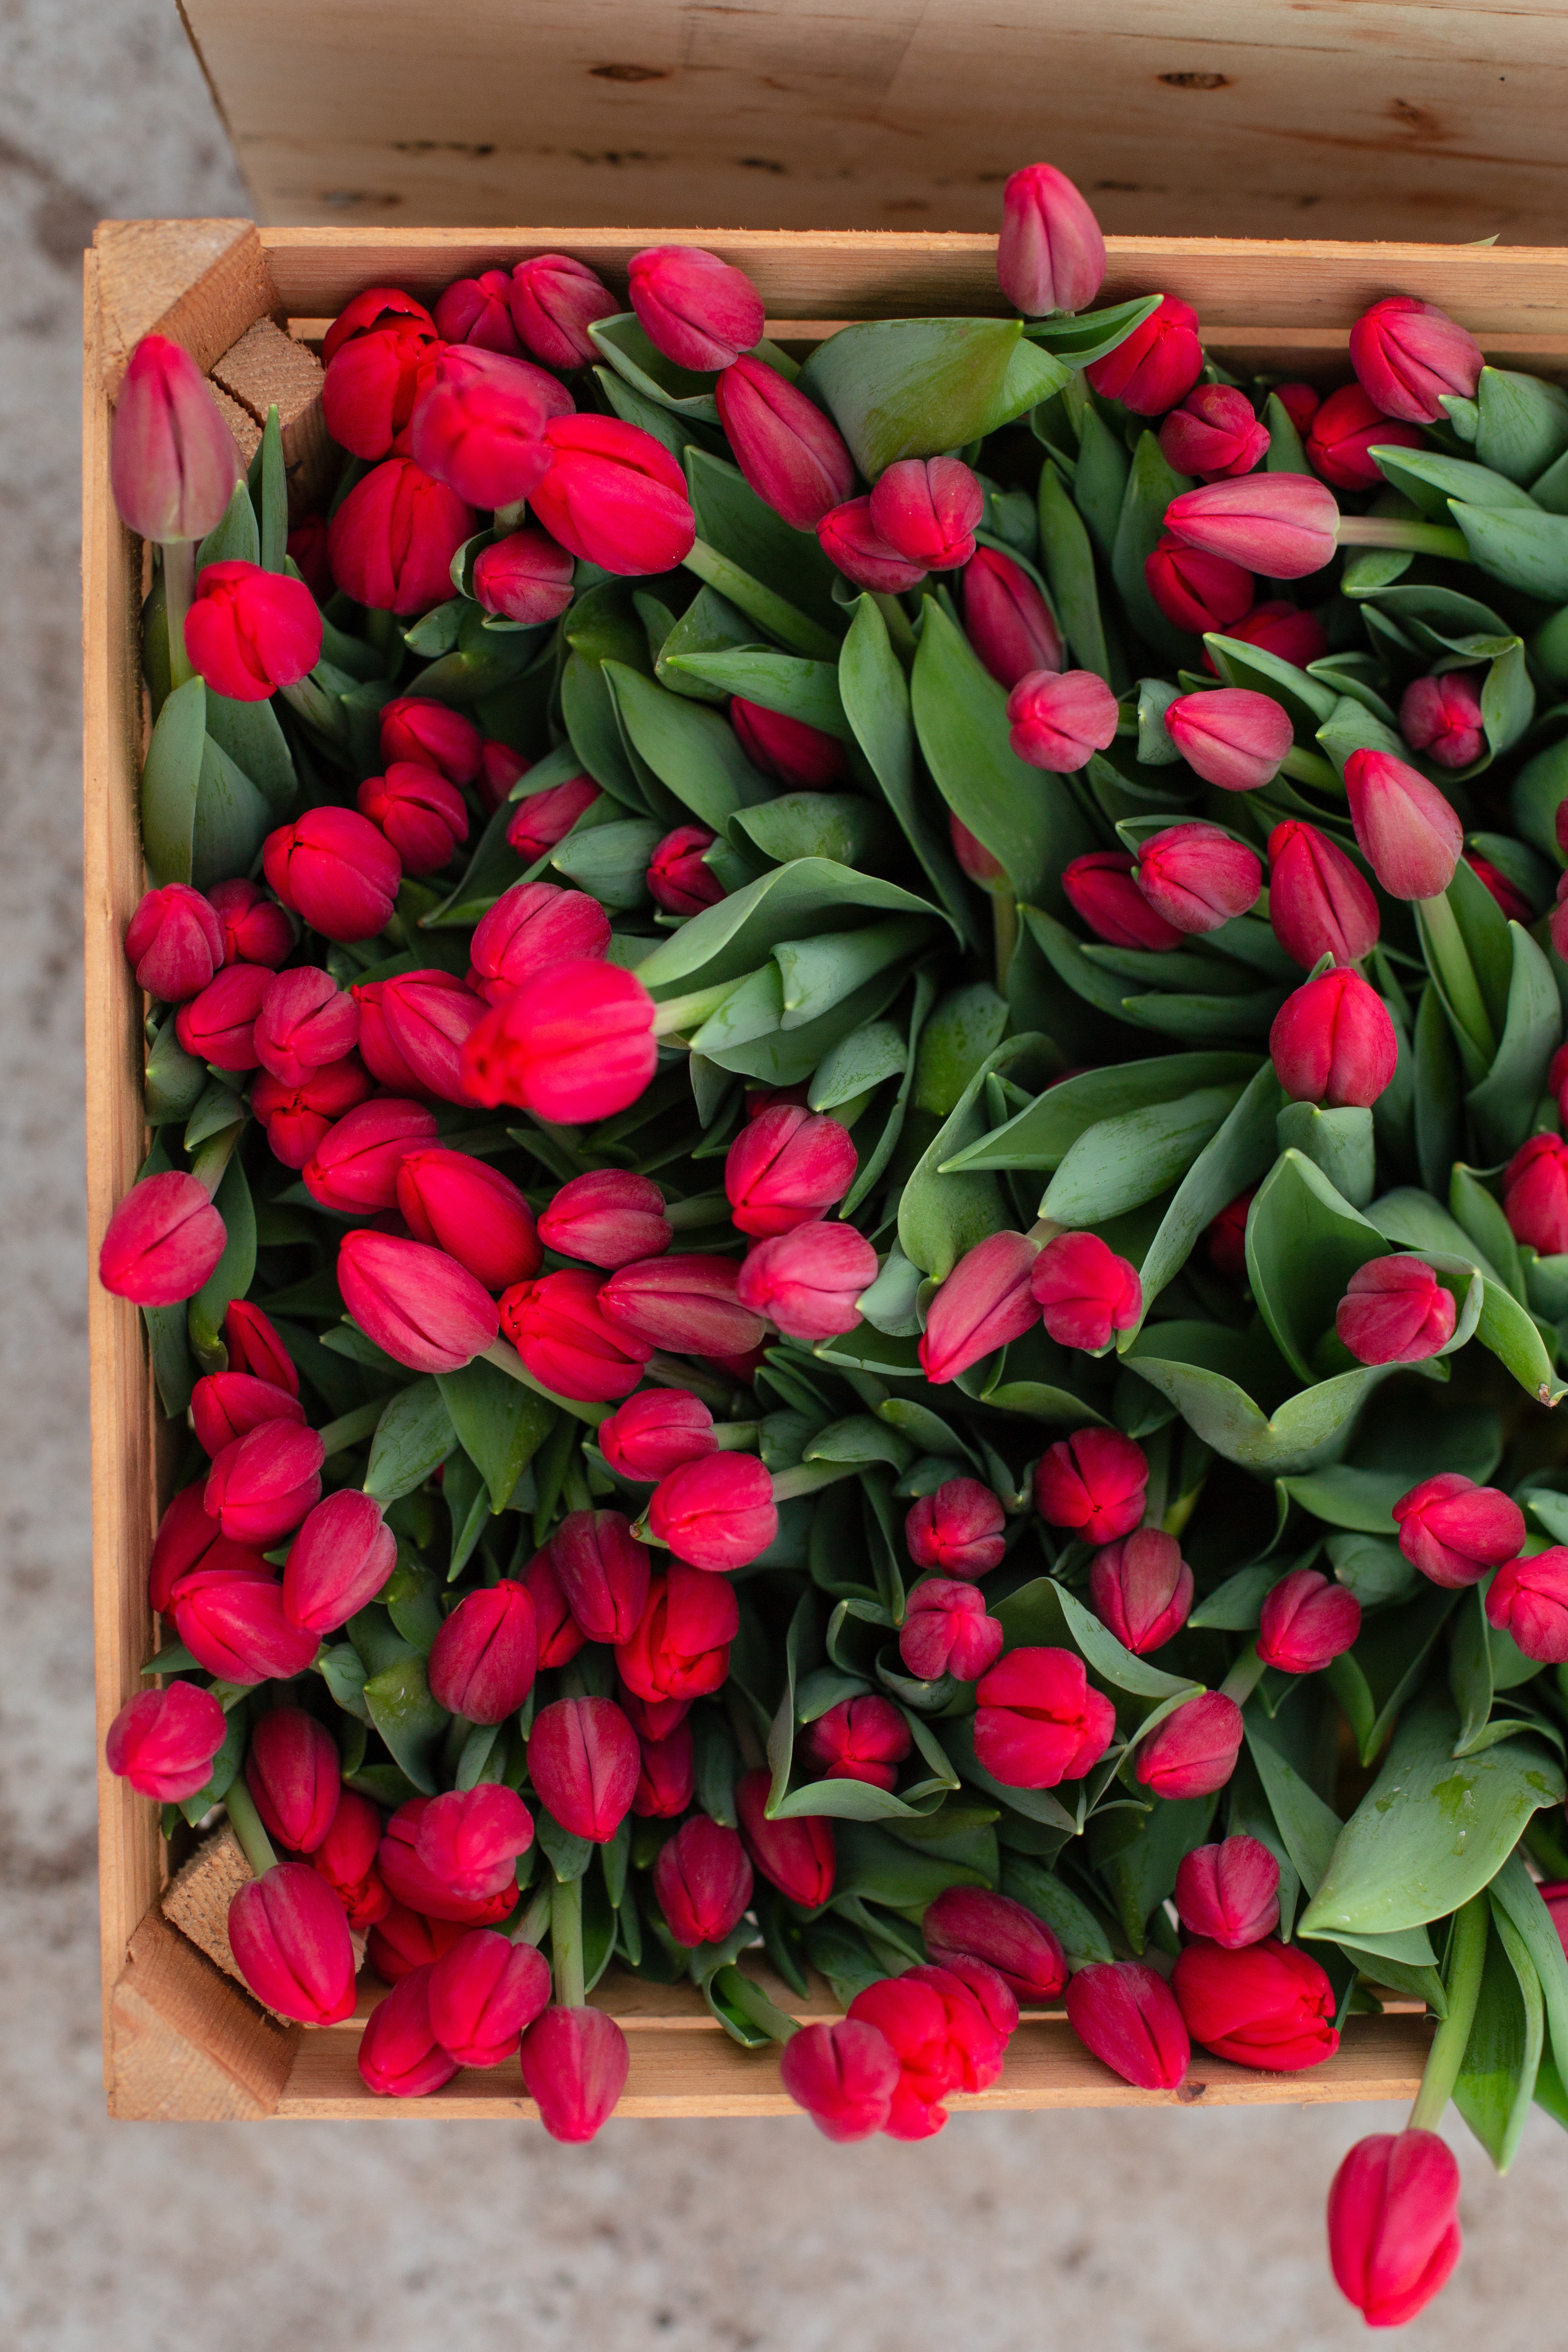 Red Tulips Wallpapers